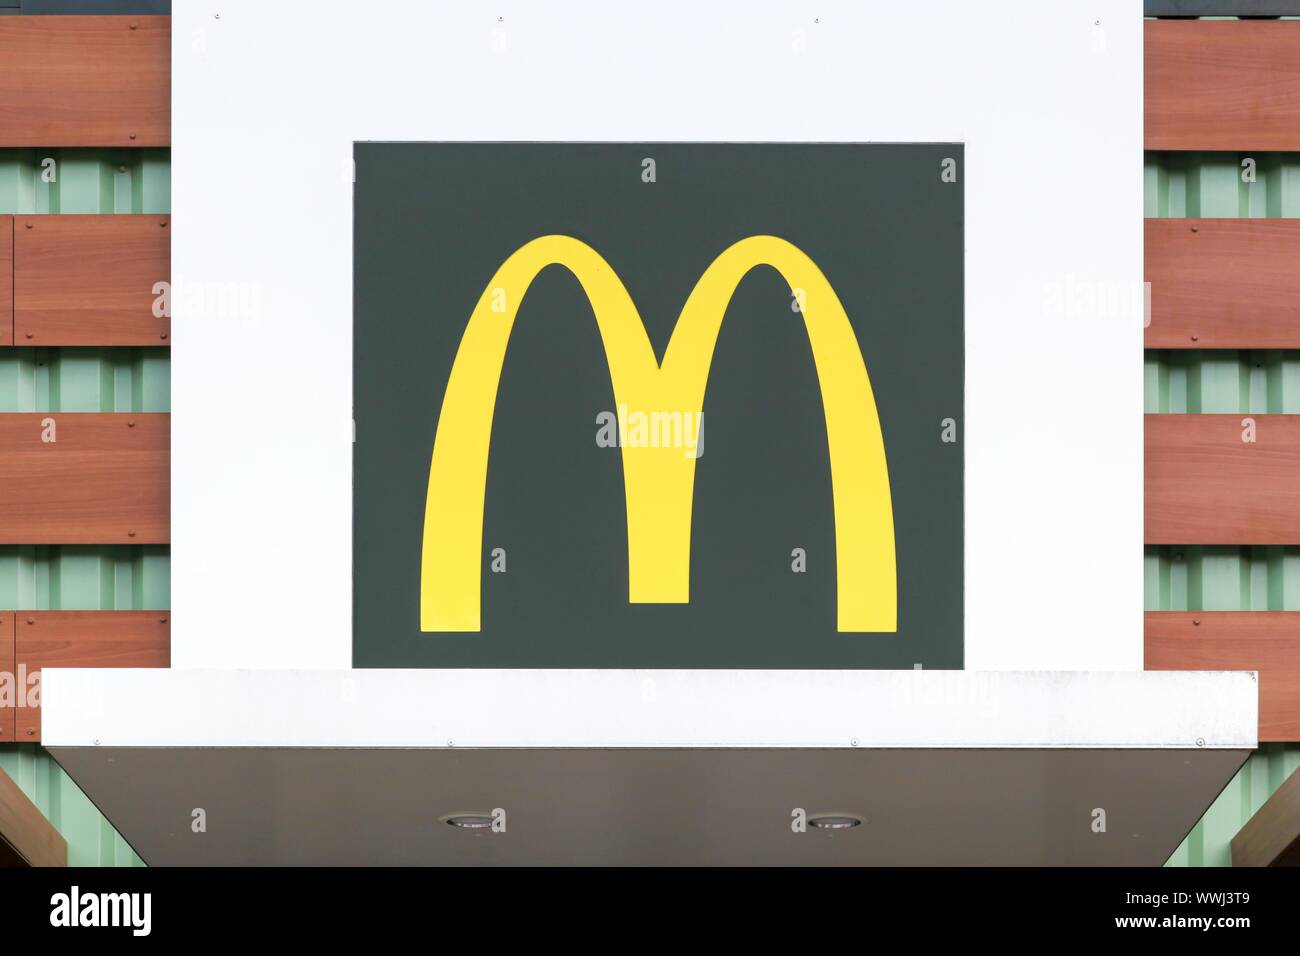 Voiron, France - June 1, 2018: Mc Donald's logo on a facade. McDonald's is the world's largest chain of hamburger fast food restaurants Stock Photo